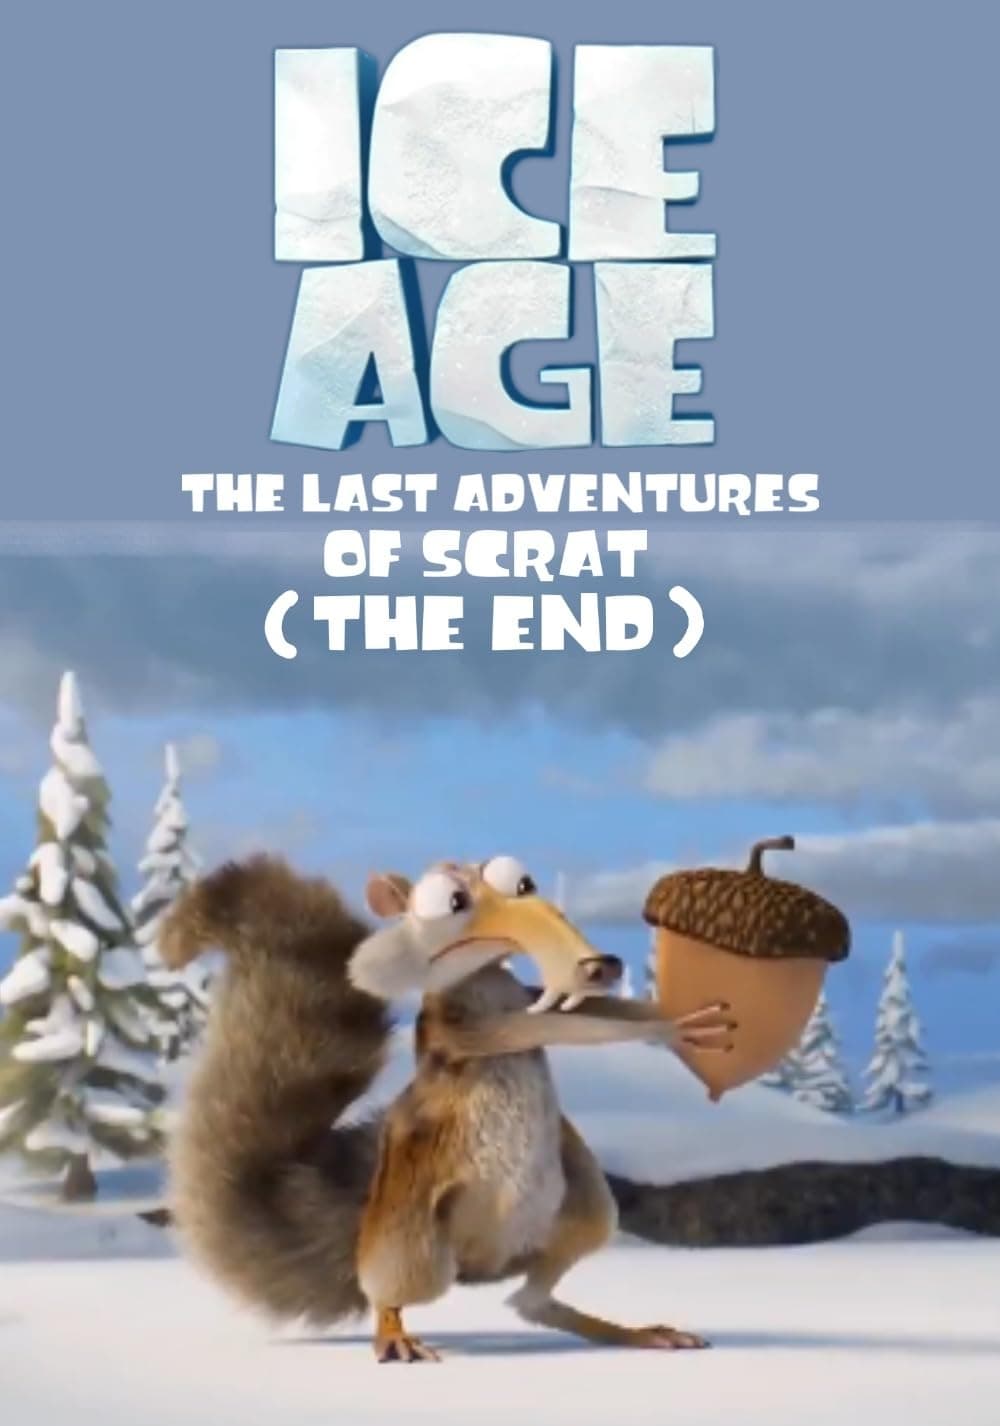 Ice Age: The Last Adventure of Scrat (The End)